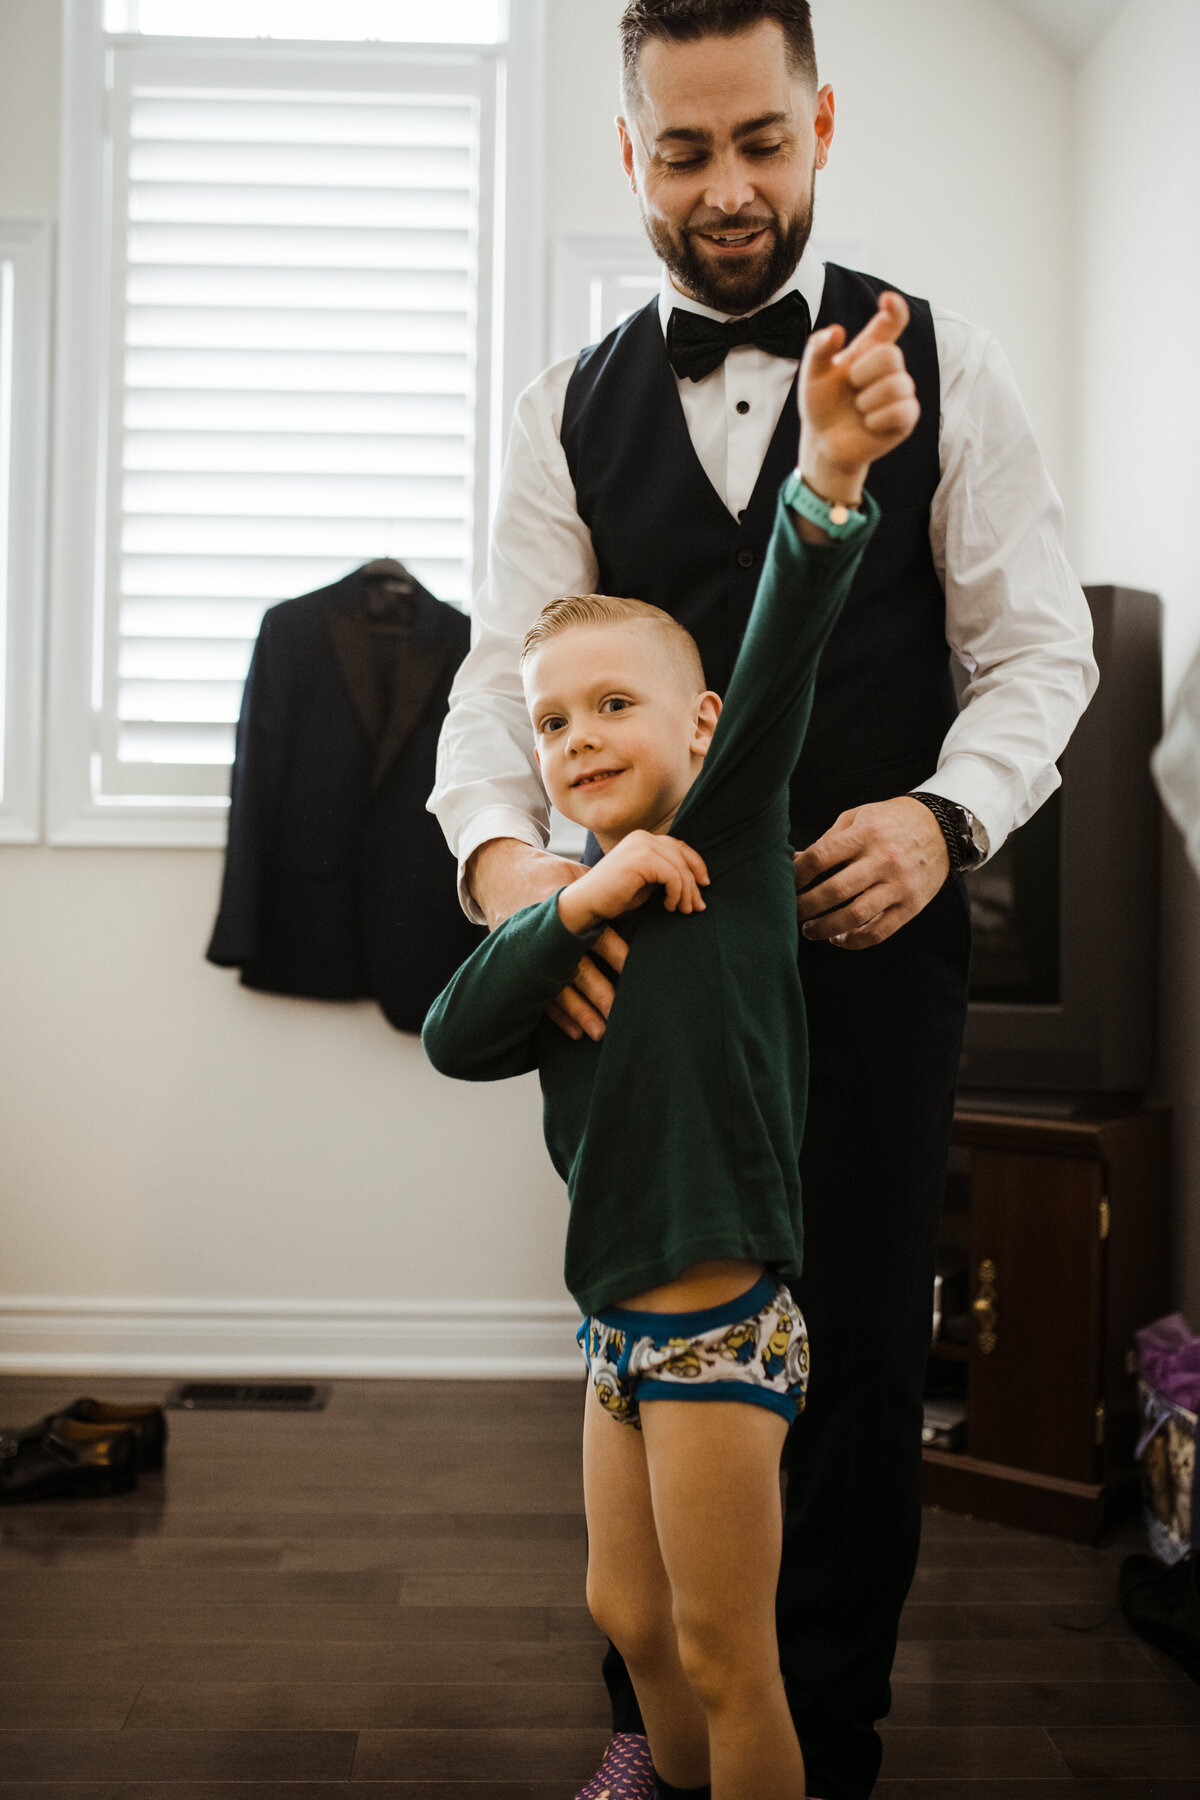 B-markham-home-covid-pandemic-diy-love-is-not-cancelled-wedding-photography-groom-son-getting-ready-20